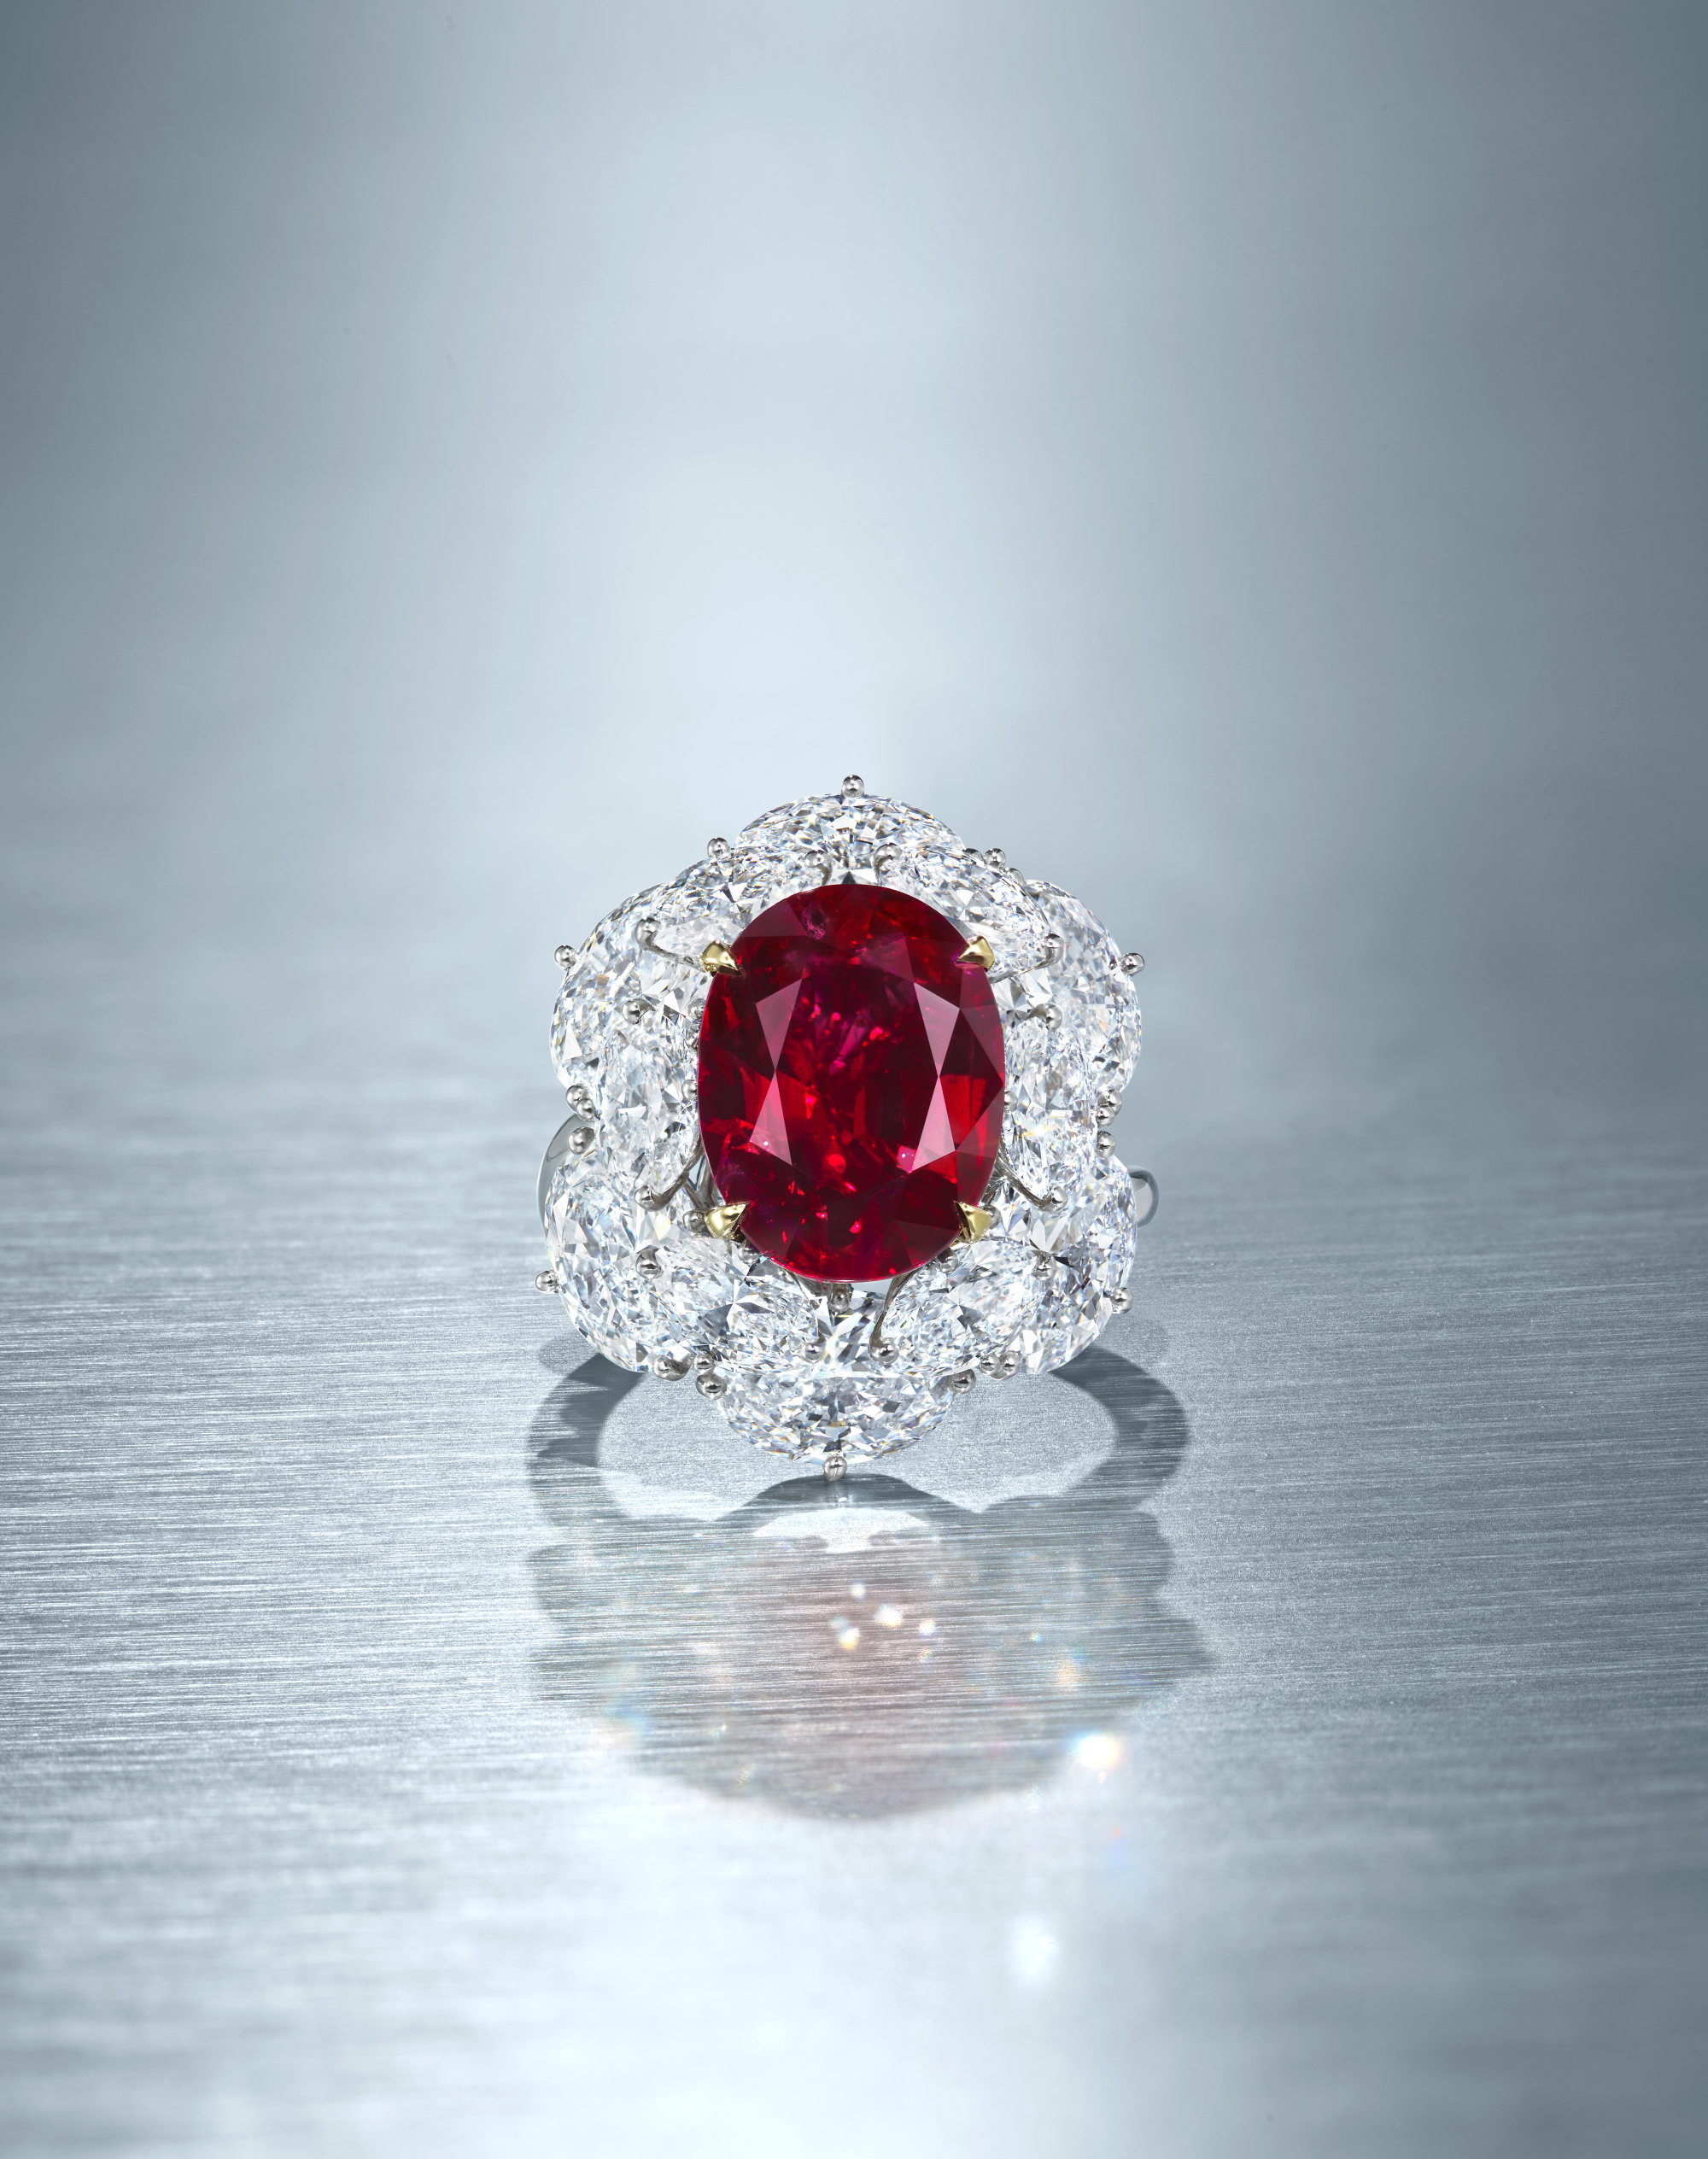 Sotheby's Sets Two Gemstone Records for a Ruby and a Pink Diamond